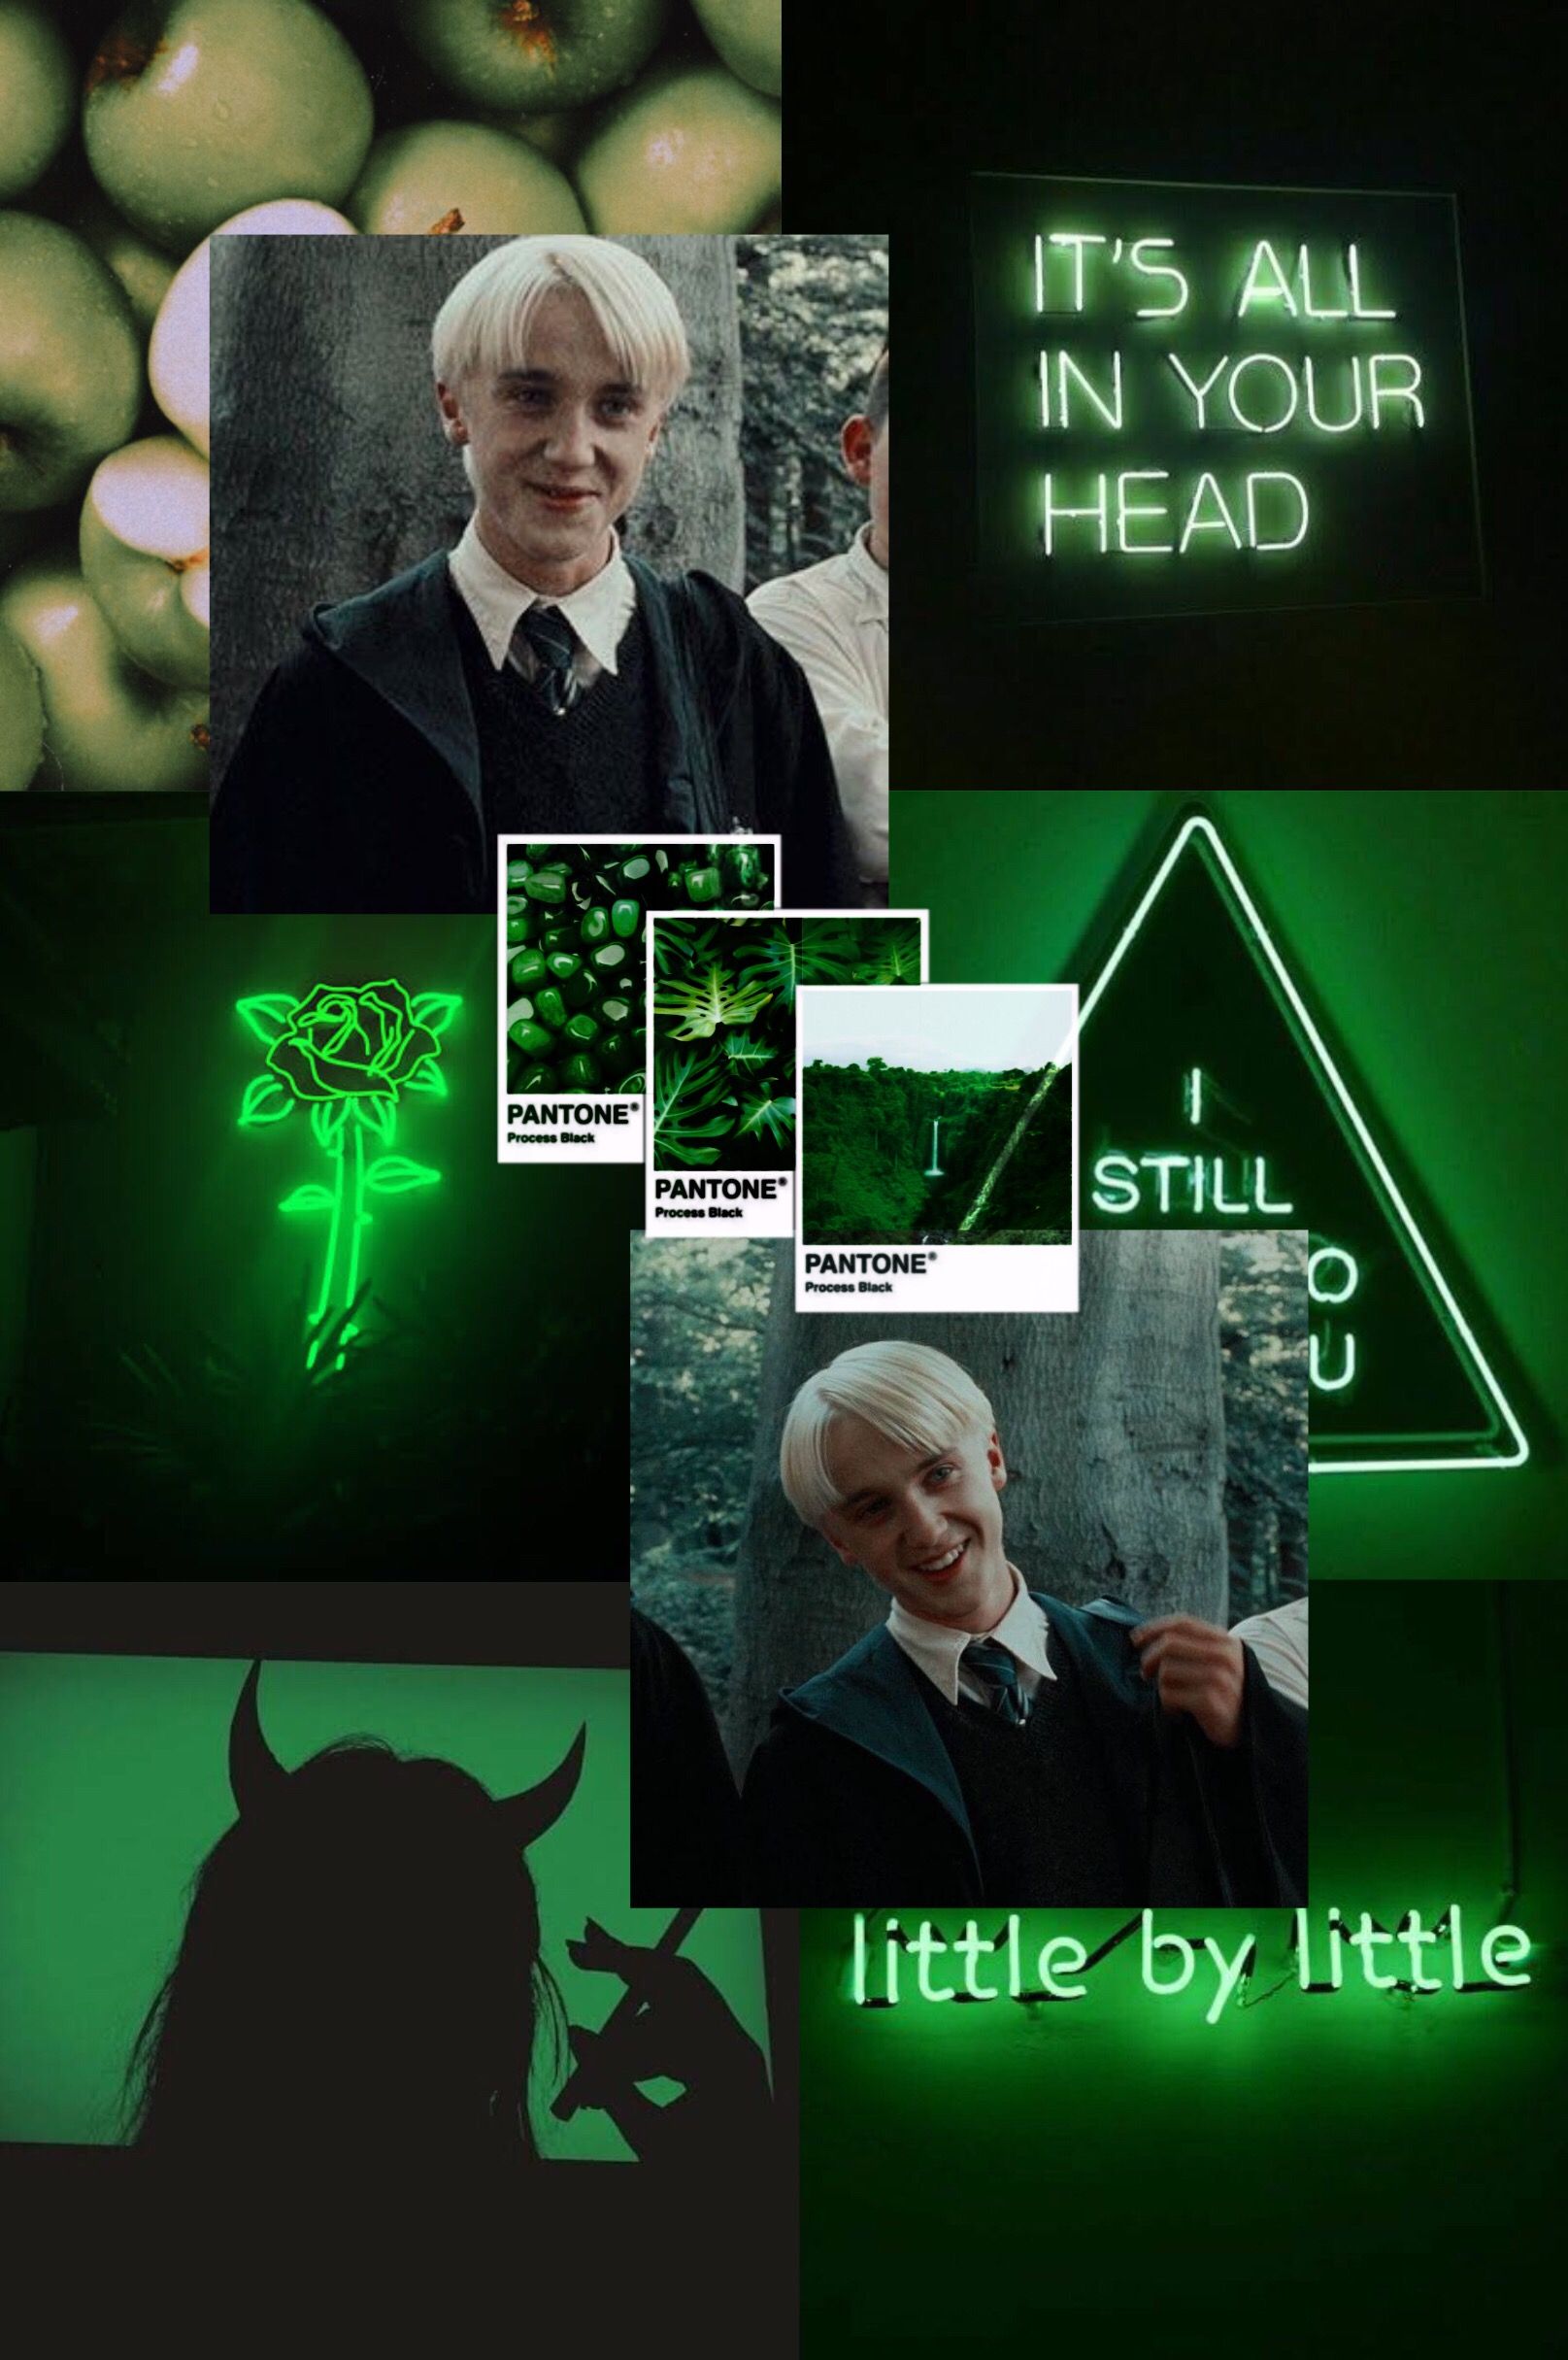 Draco Malfoy Second Year Wallpapers